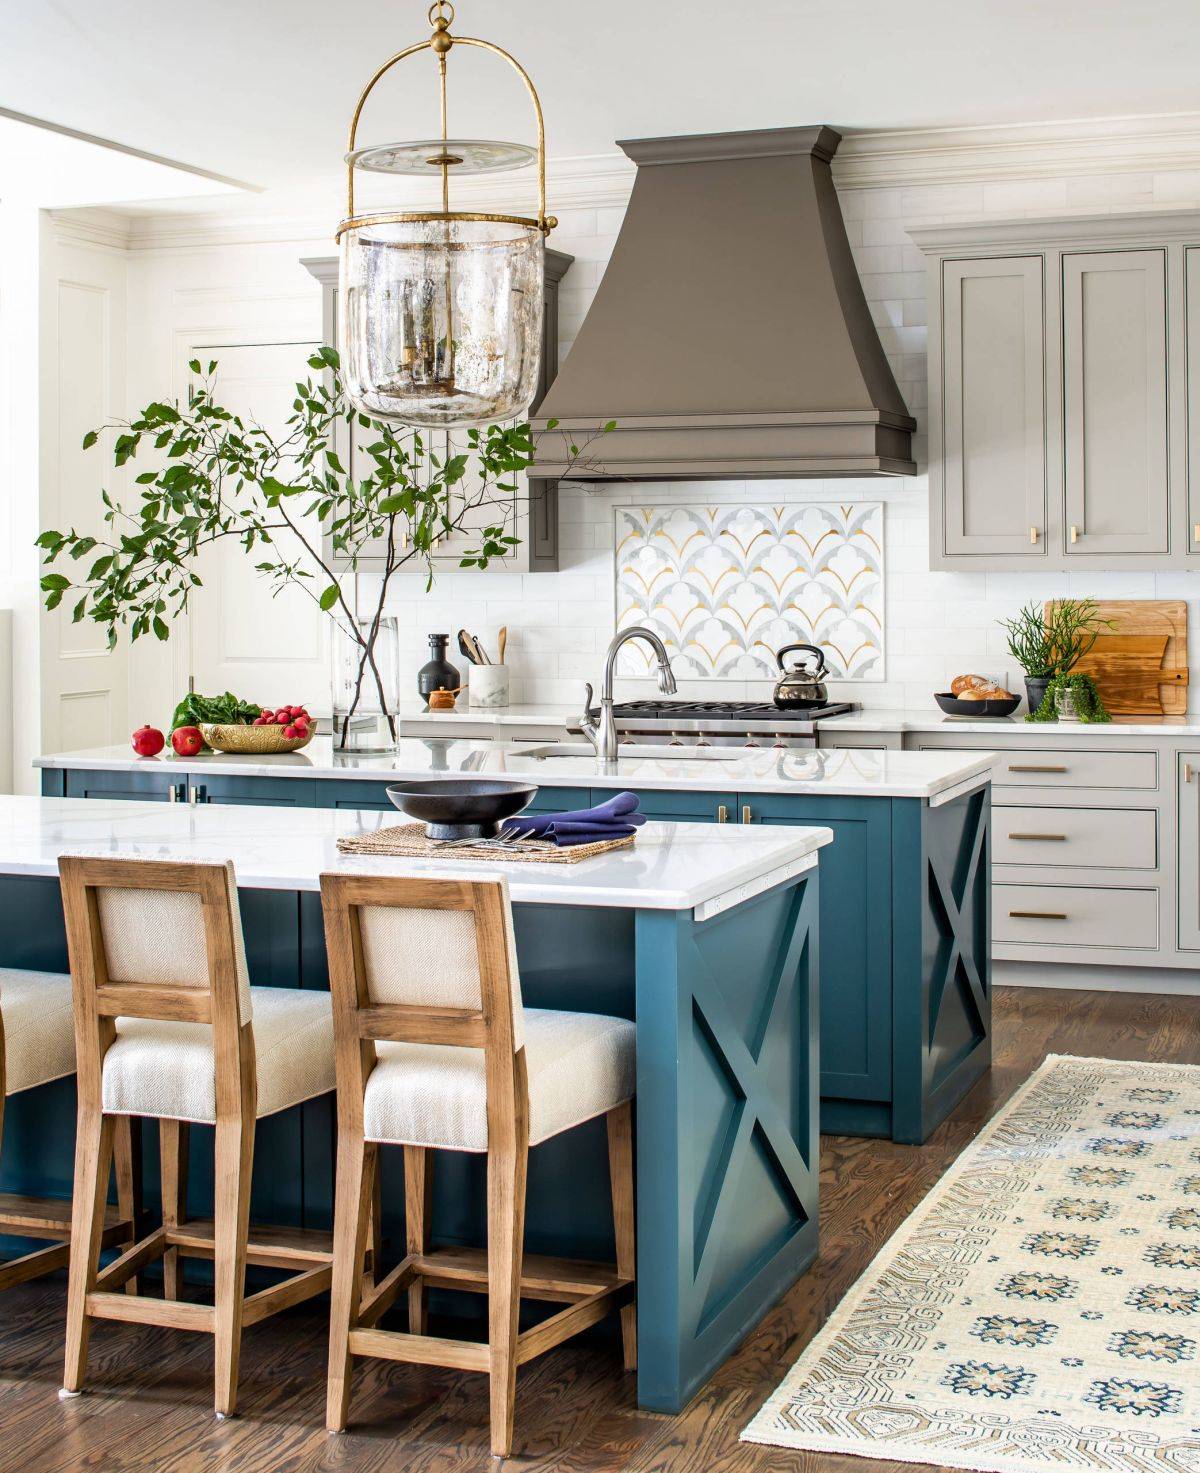 Twin-kitchen-islands-in-blue-with-white-countertops-are-just-perfect-for-this-modern-farmhouse-style-kitchen-53845